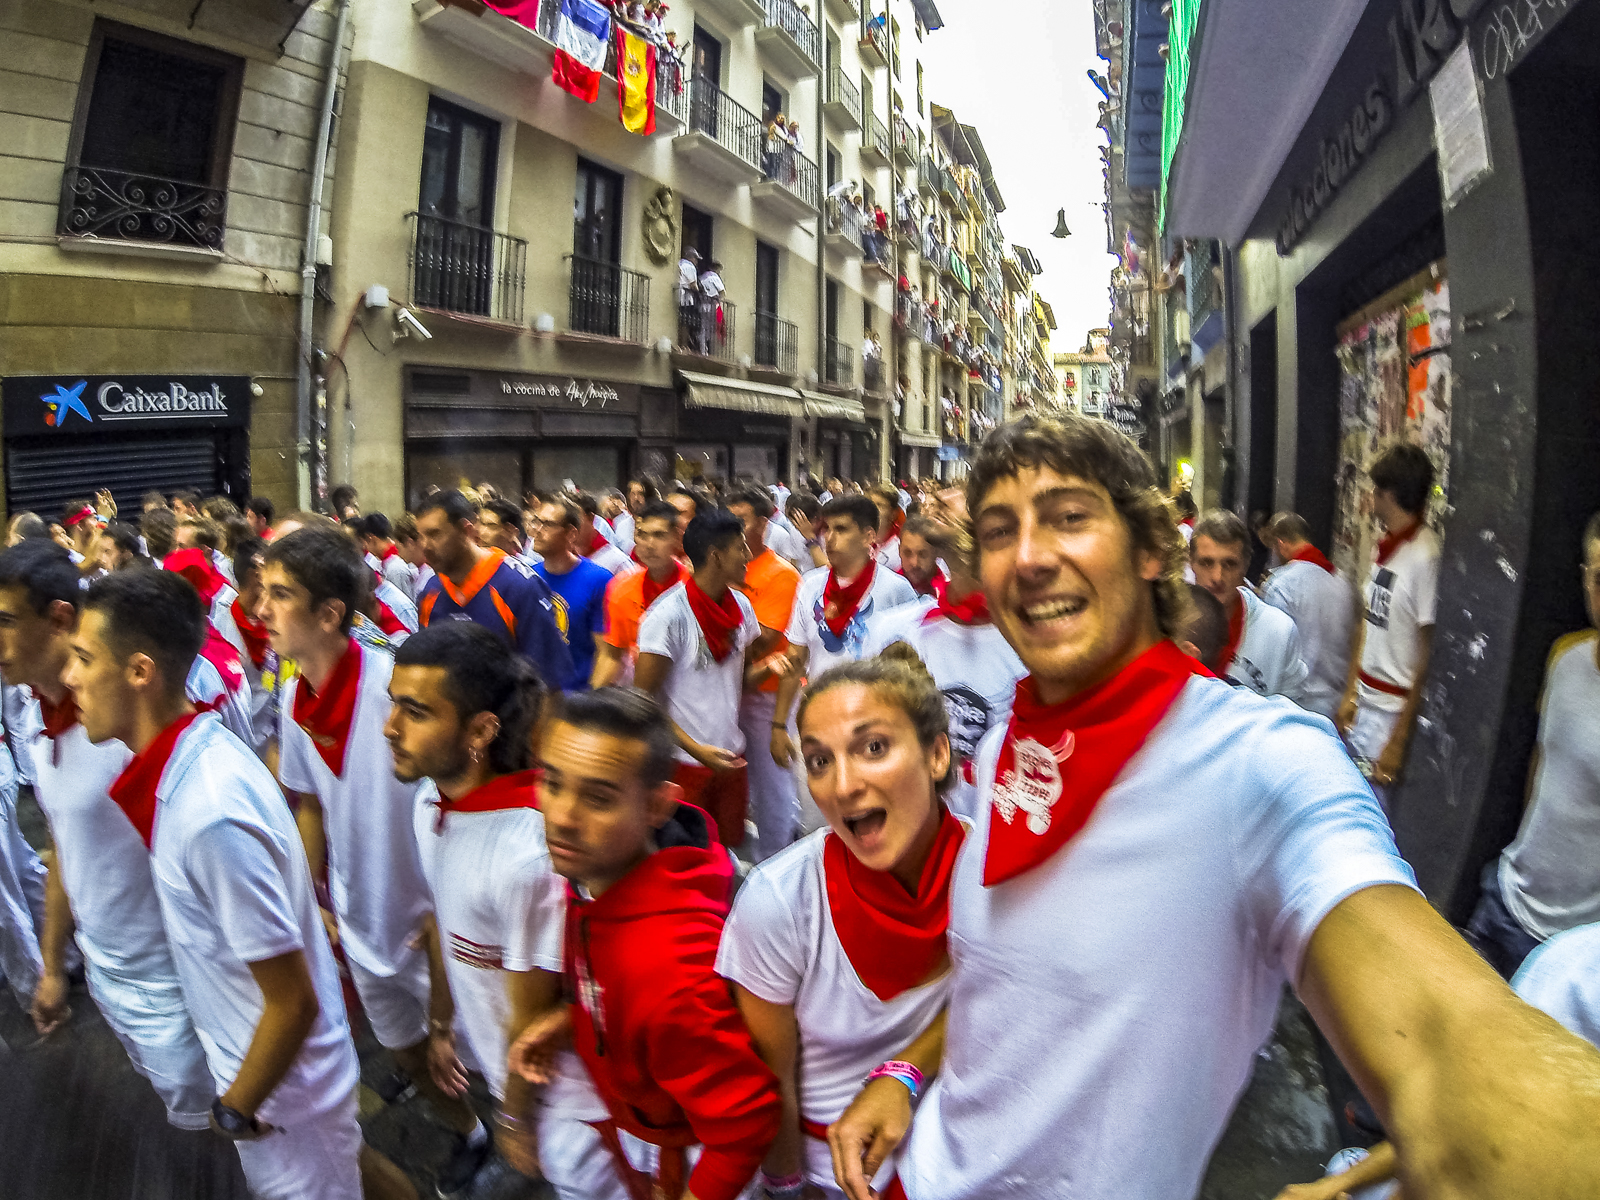 Running with the Bulls in Pamploma